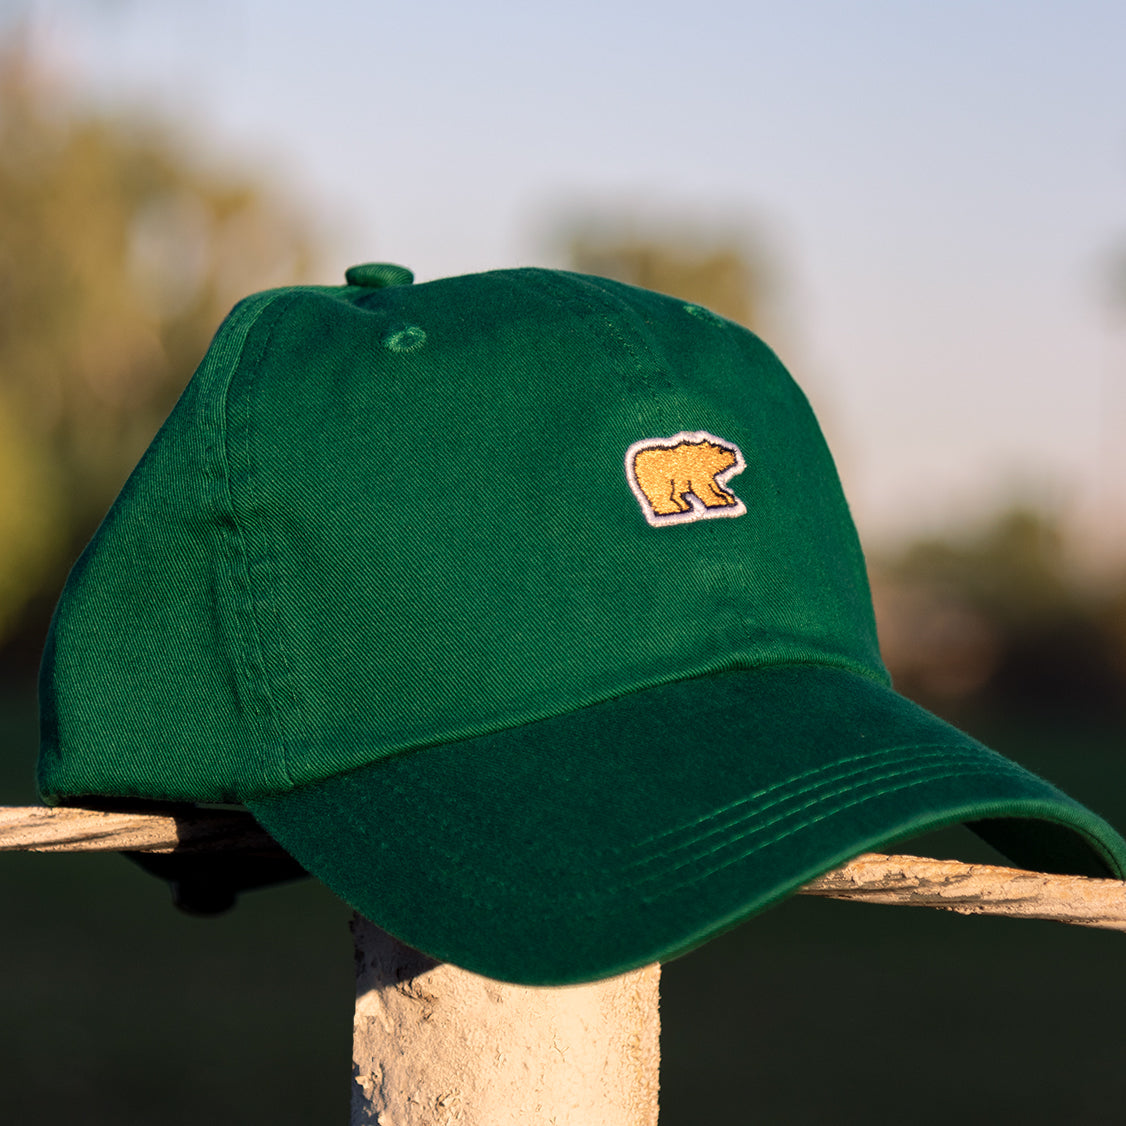 Nicklaus Yellow/Green-Bear Cap: Limited Edition -Green w/ White Outline